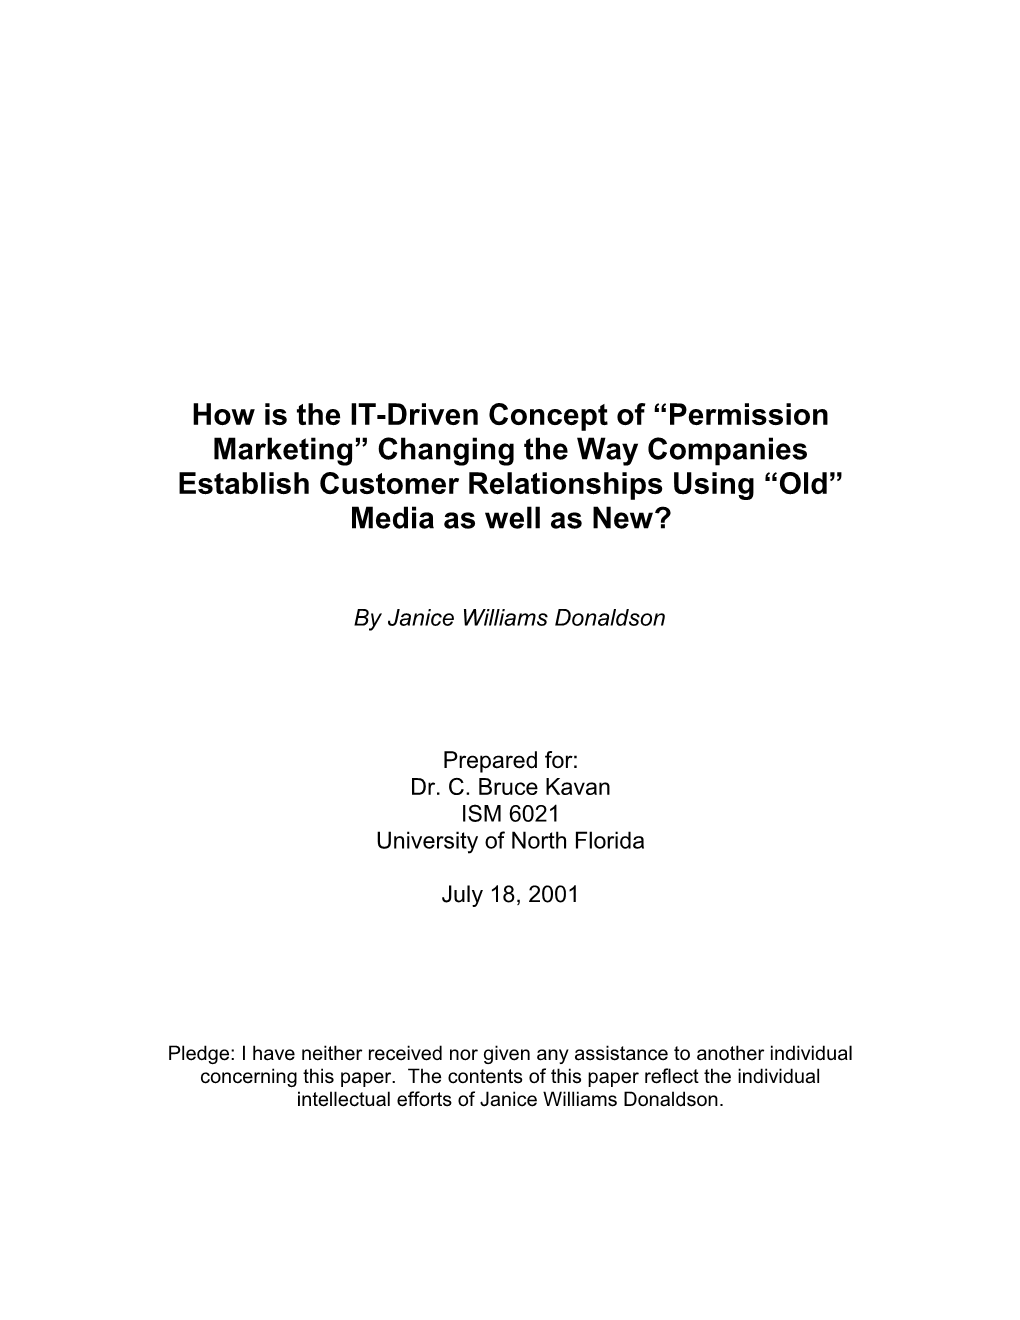 How Is the IT-Driven Concept of Permission Marketing Changing the Way Companies Establish